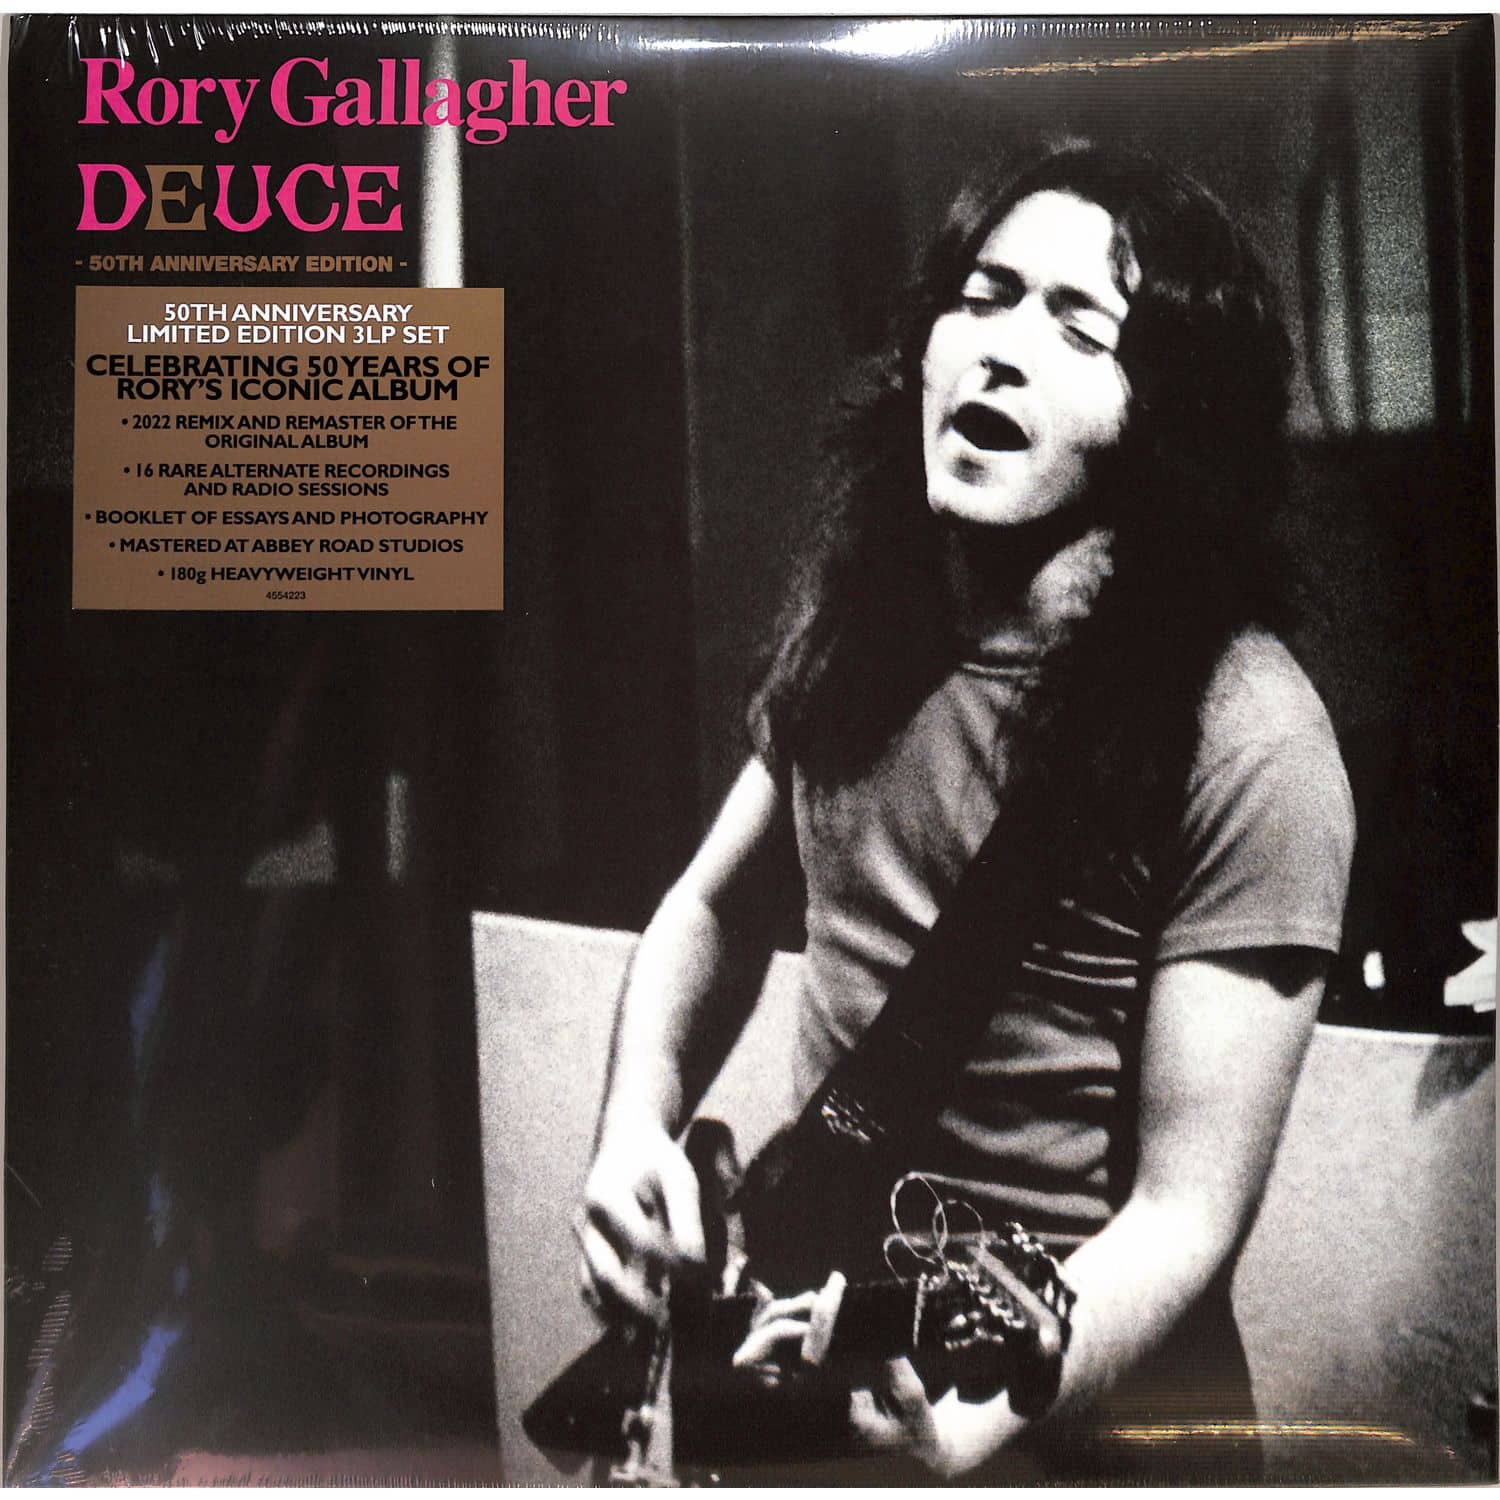 Rory Gallagher - DEUCE 